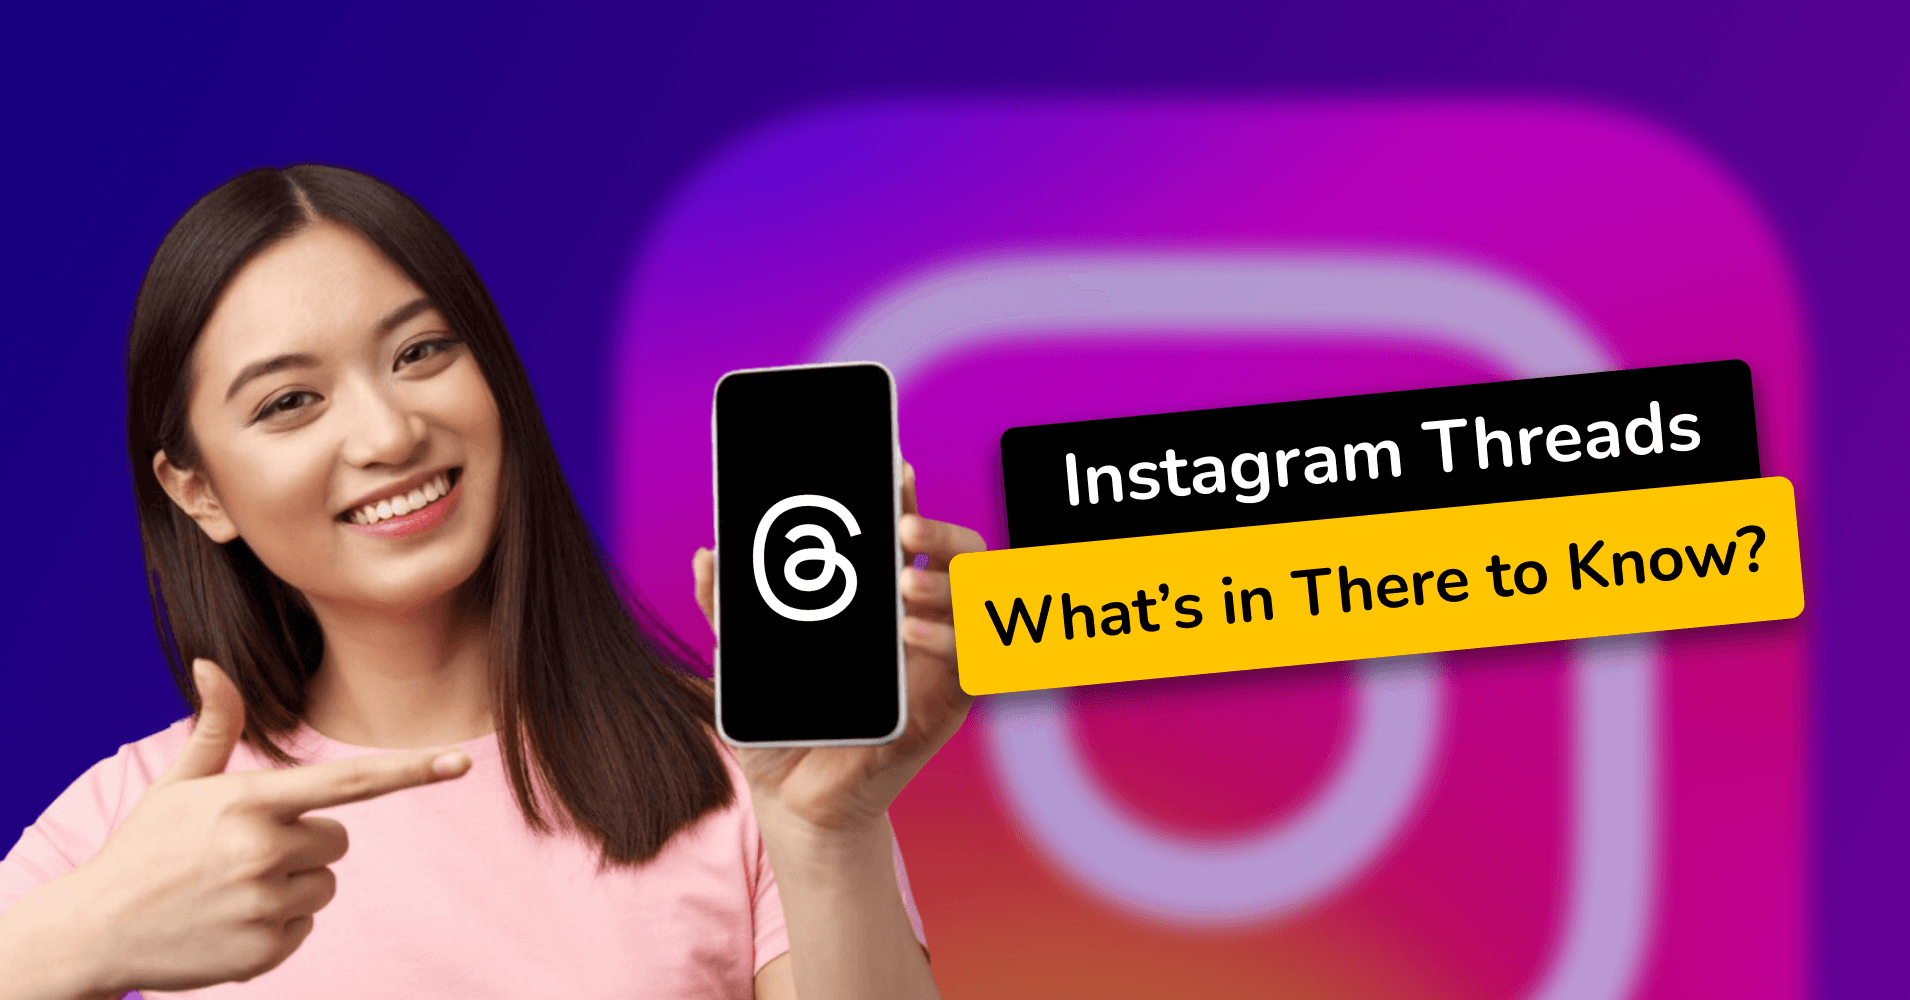 Instagram Threads: What’s in There to Know?